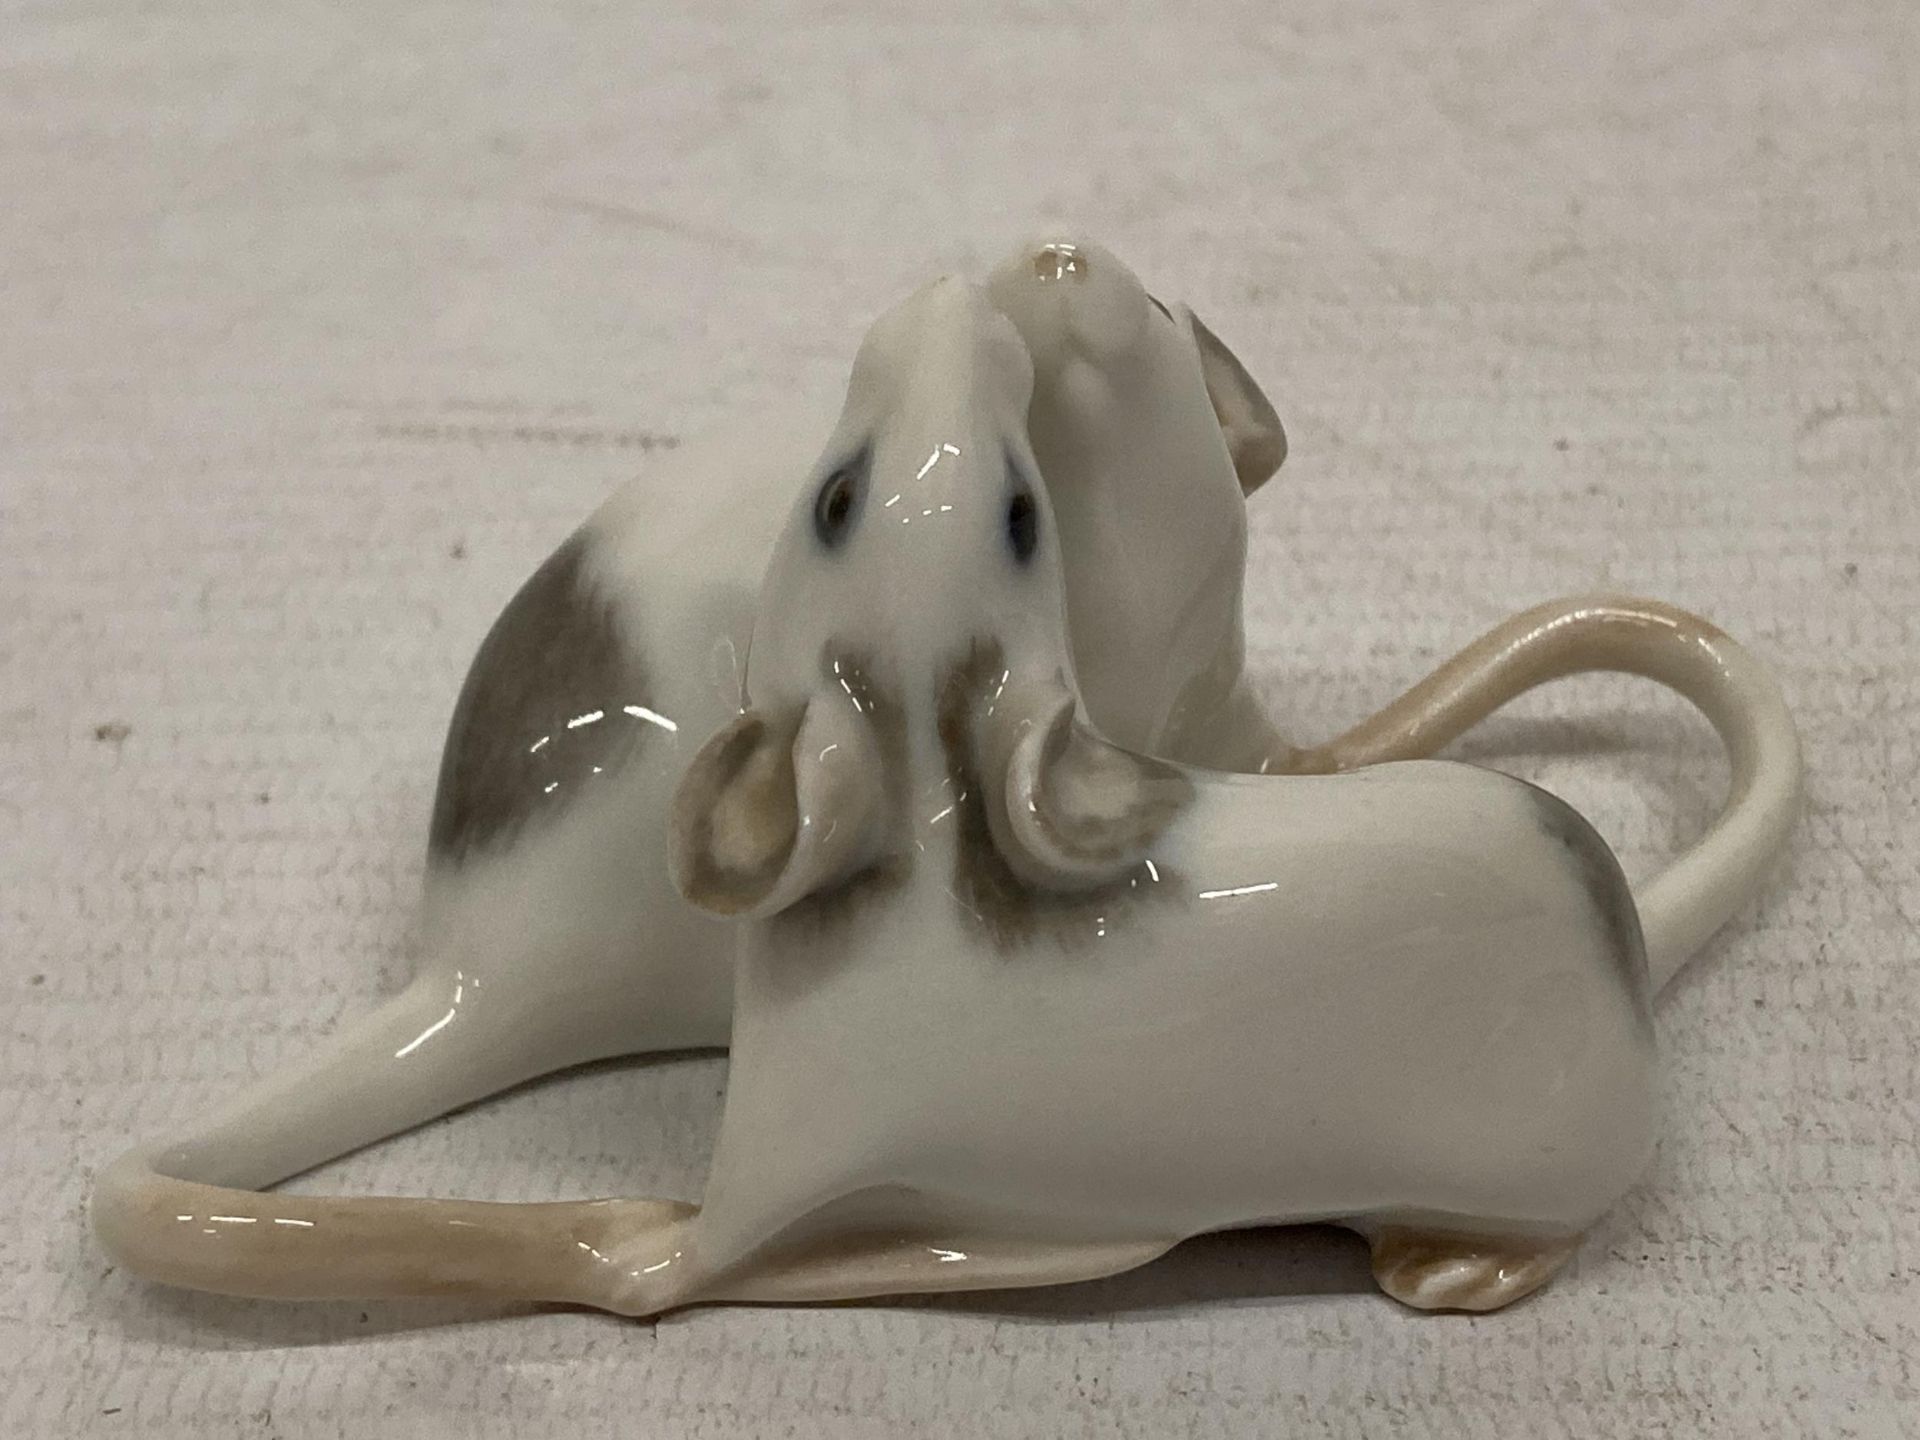 A ROYAL COPENHAGEN 1960 MICE FIGURE, MODEL NUMBER 521, MODELLED BY ARNOLD KROG IN 1903, MARKED TO - Image 3 of 4